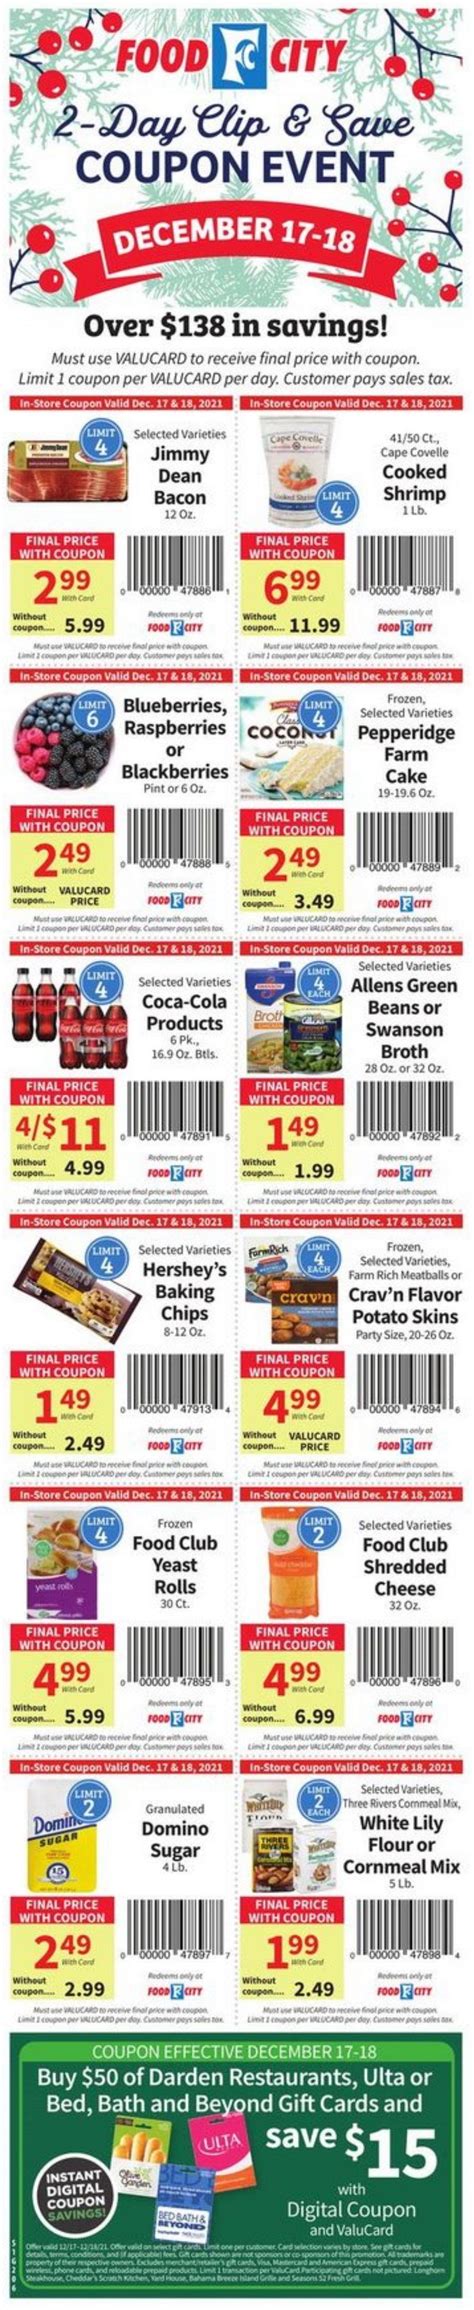 Food city abingdon va weekly ad. 09/09/2018 hey, your supposed to be a discount store and yet your prices are getting higher especially your meats. there are other items in your store getting higher as well. that's what the discount store here at wolf hills in abingdon did. they got so high i stopped shopping there. they are an extension of food city. they are in the same ... 